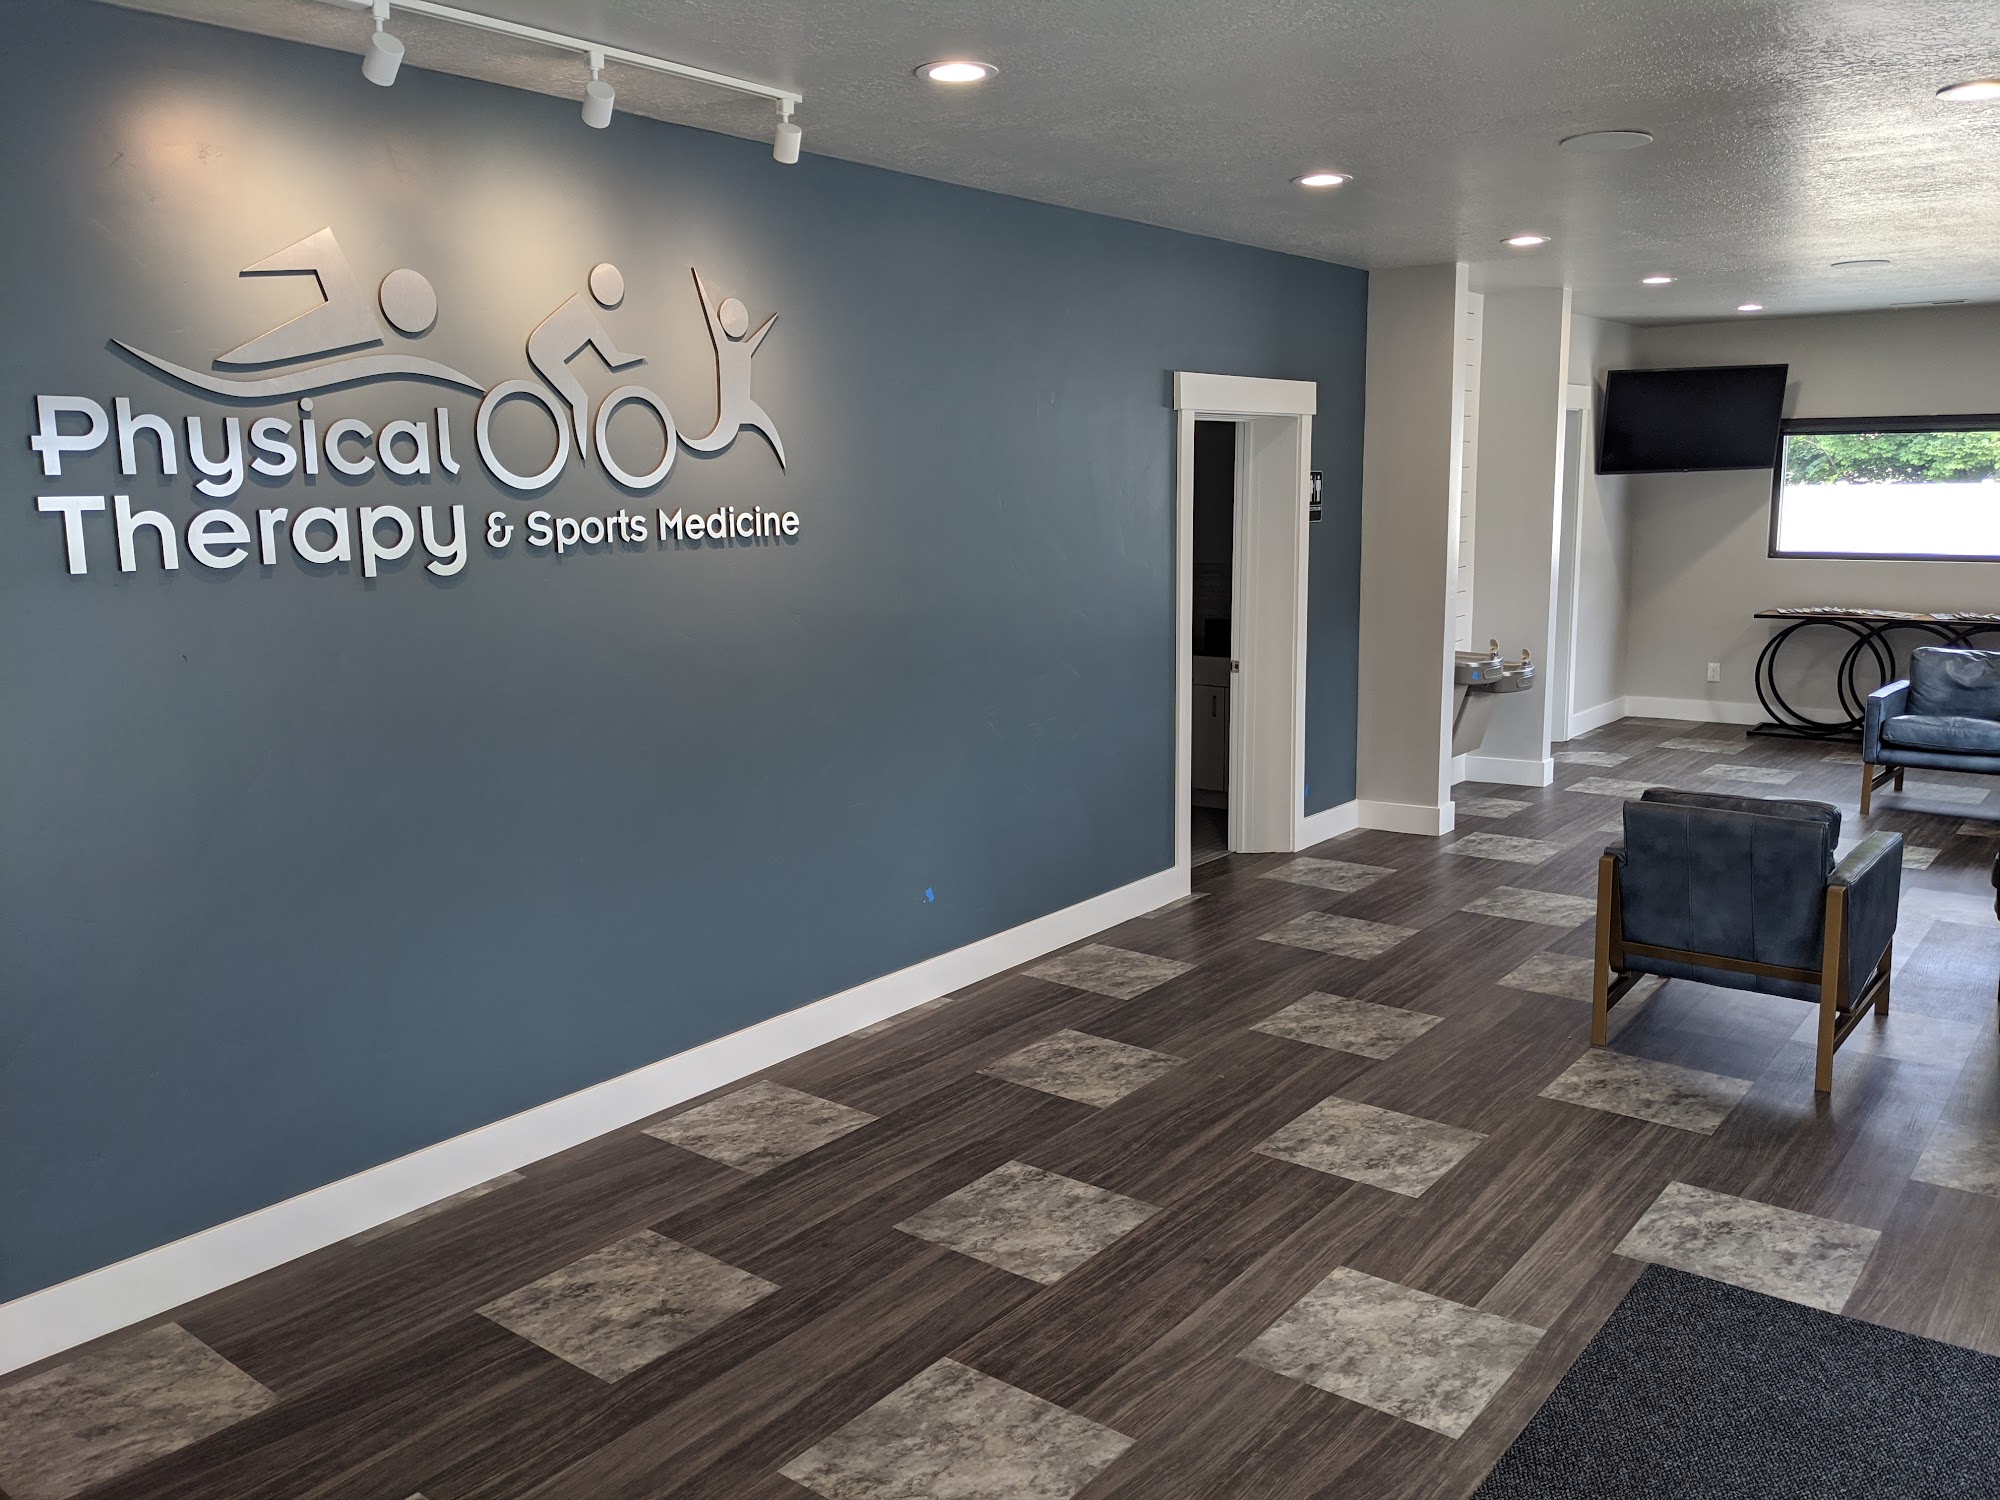 Physical Therapy and Sports Medicine 2369 N Washington Rd Blvd, North Ogden Utah 84414